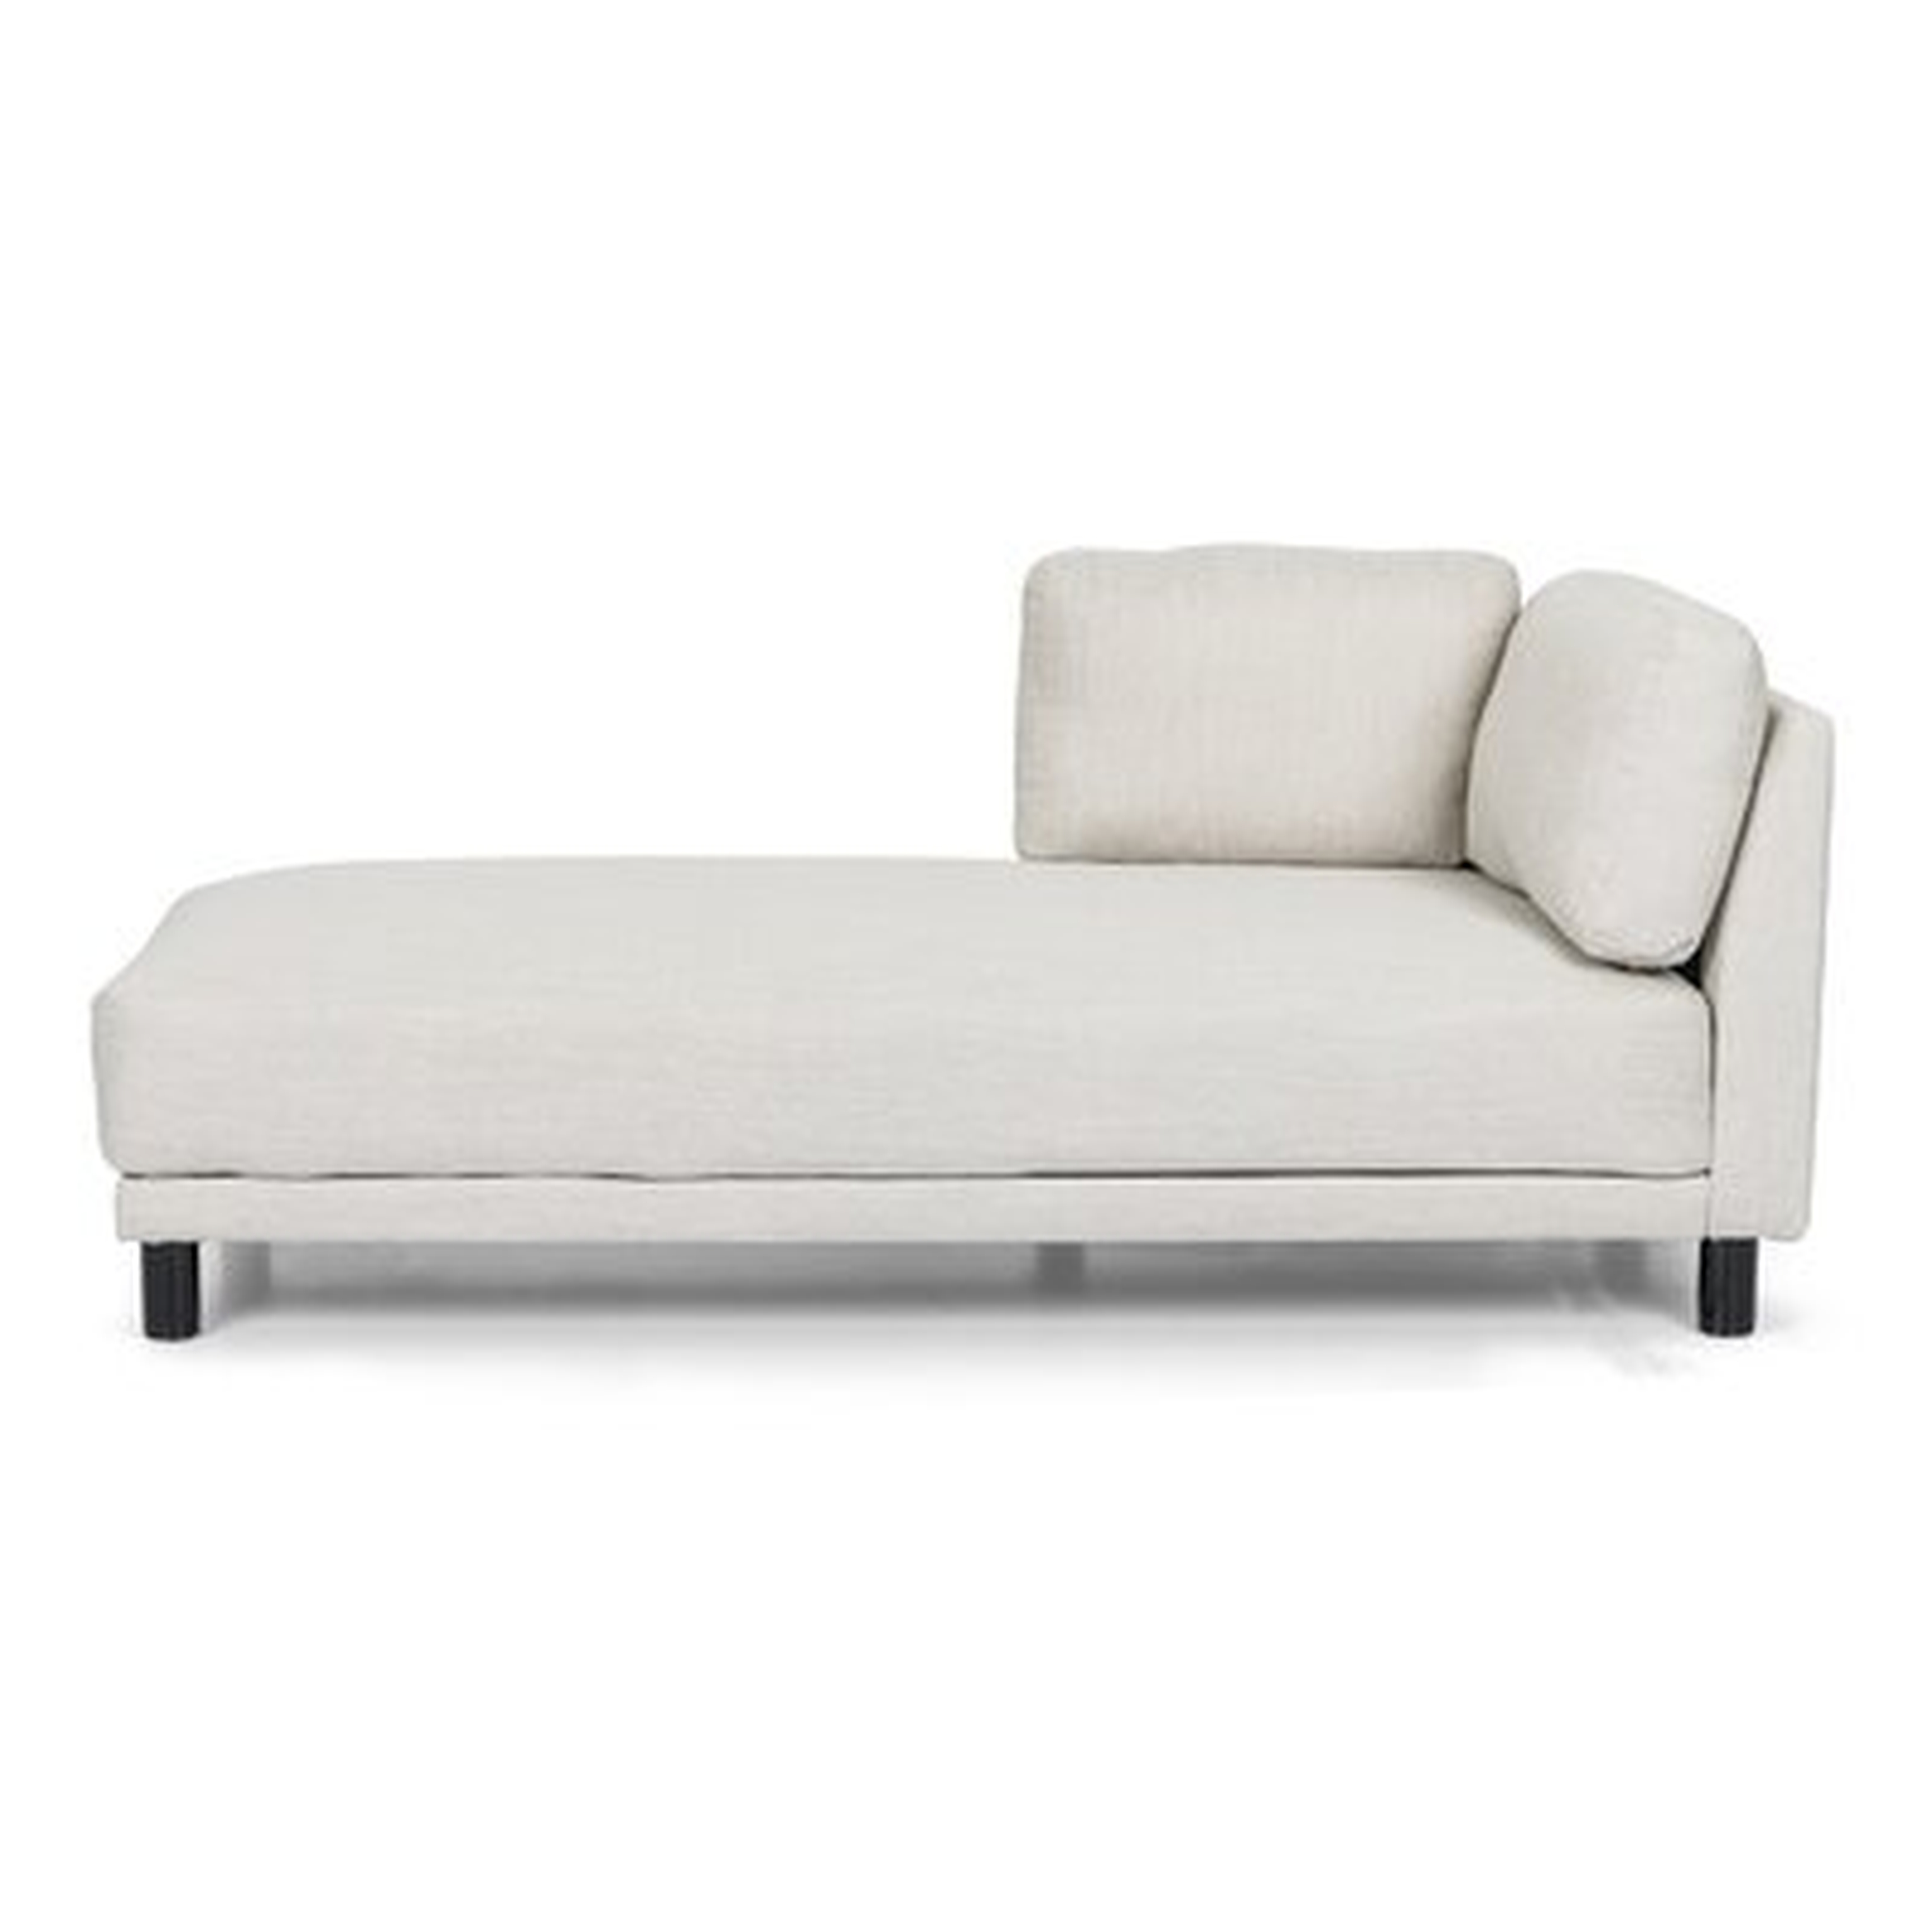 Pendlebury Left Square Arms Chaise Lounge - Wayfair